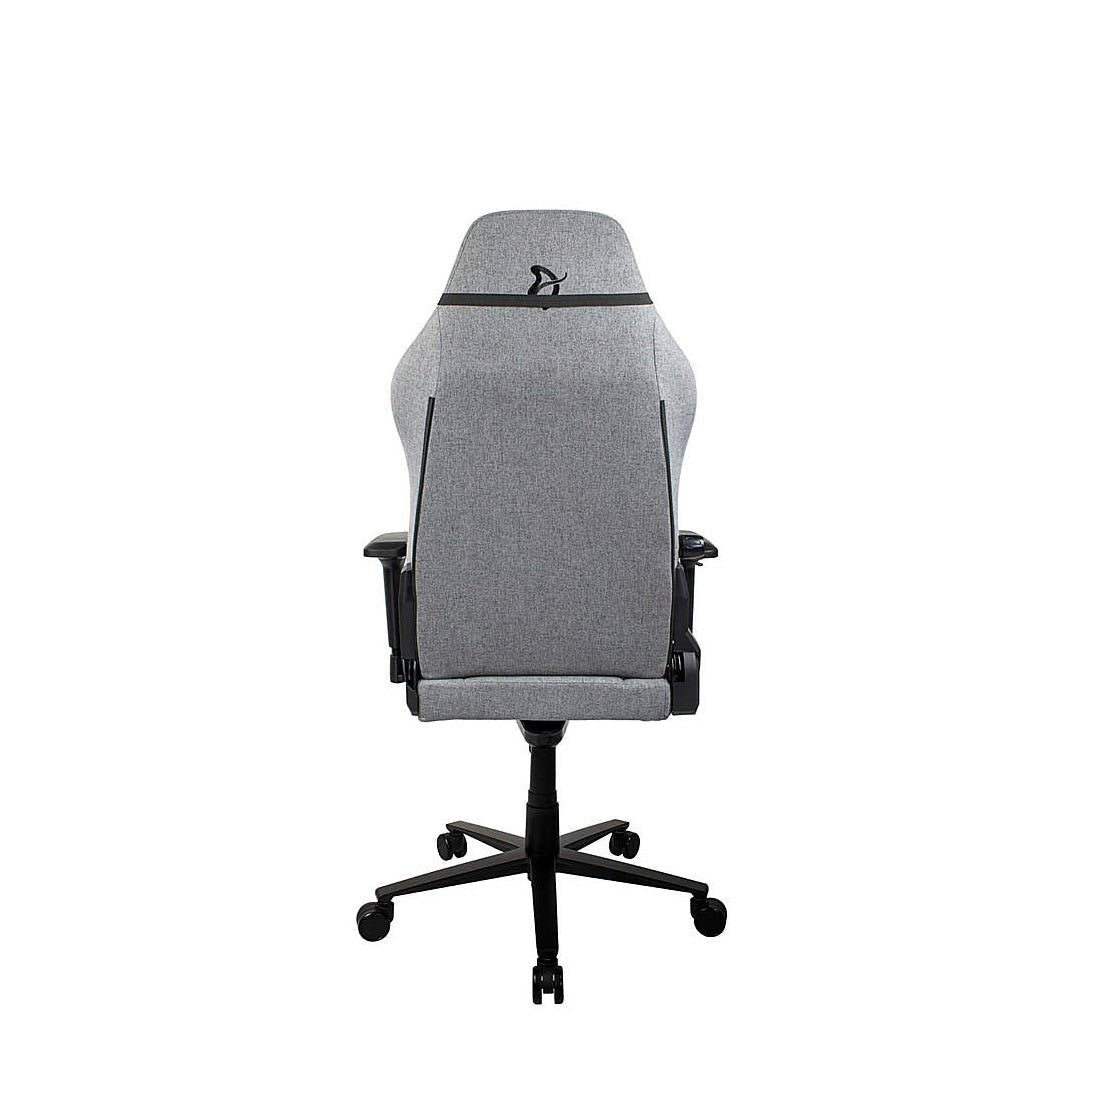 Arozzi Primo Premium Woven Fabric Gaming/Office Chair - Light Grey - Store 974 | ستور ٩٧٤